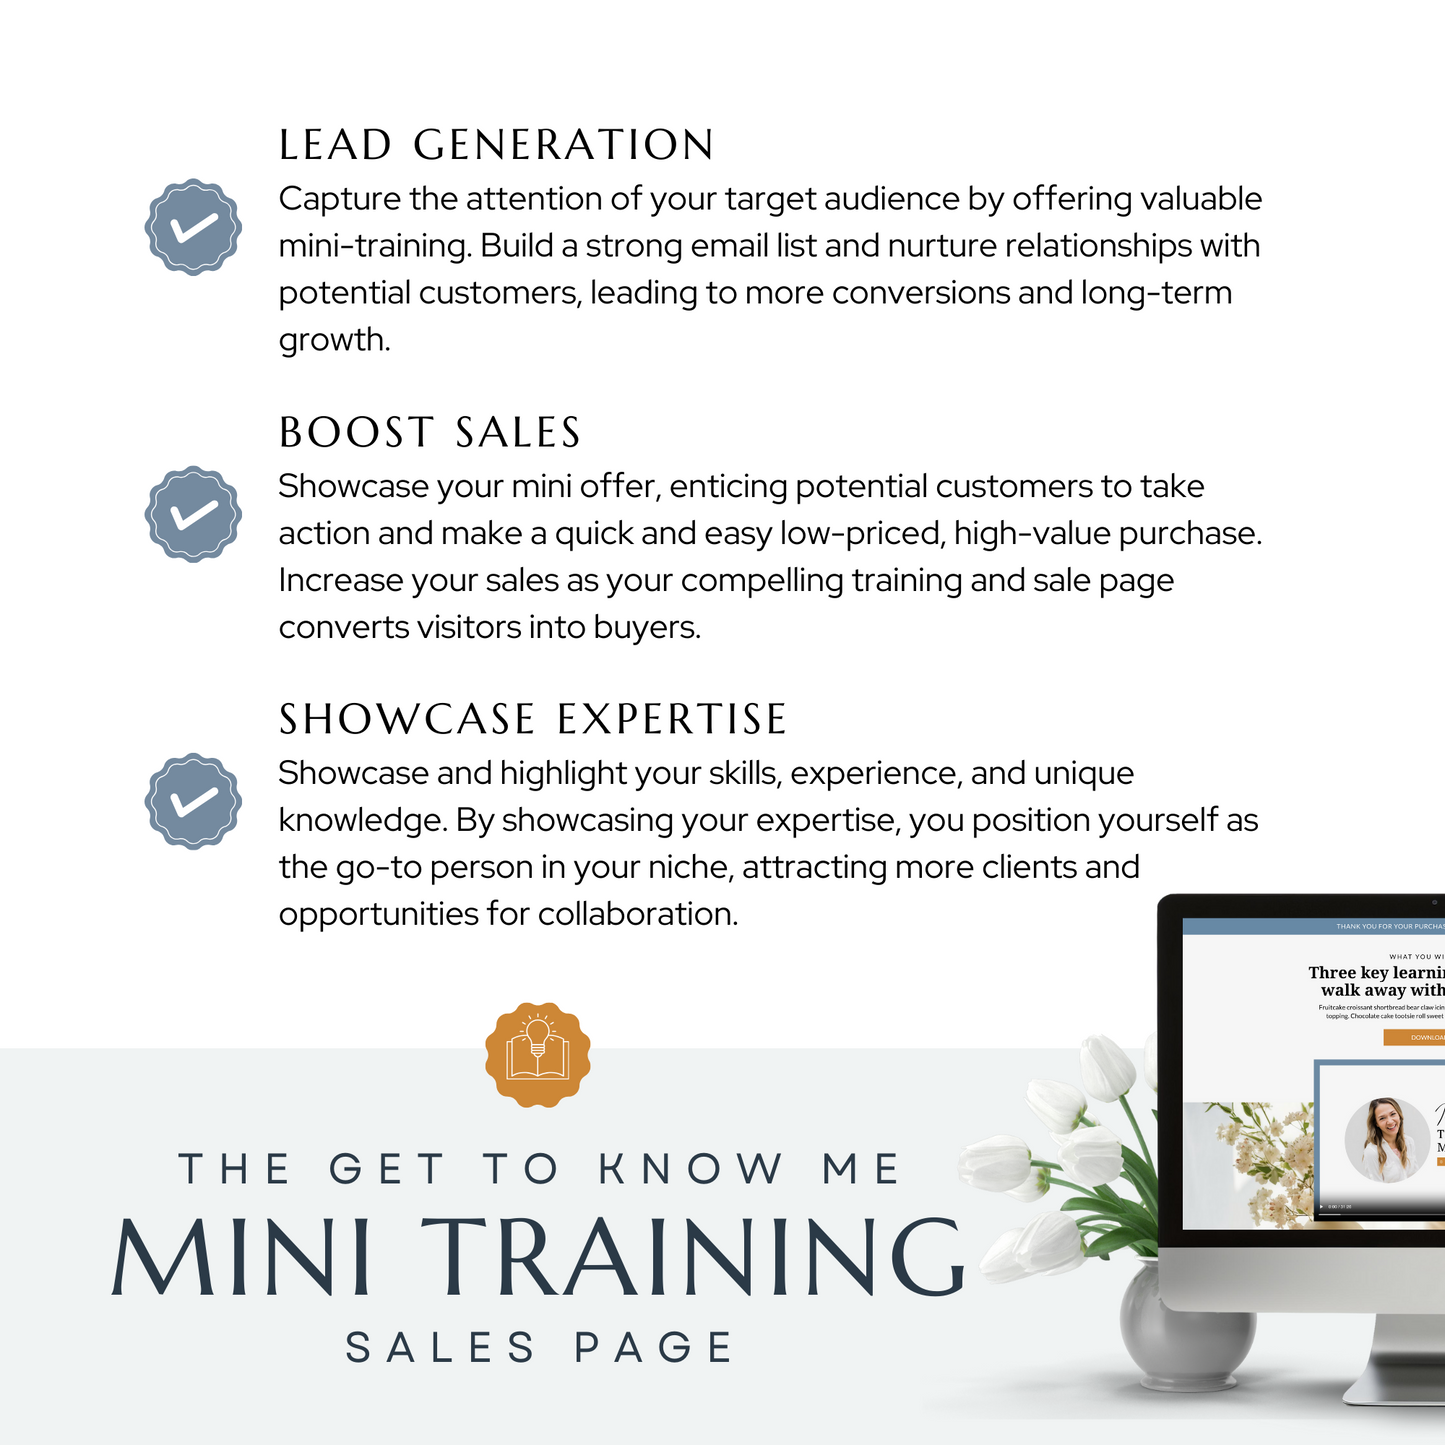 Get to Know Me Mini Training Sales Page for Systeme.io